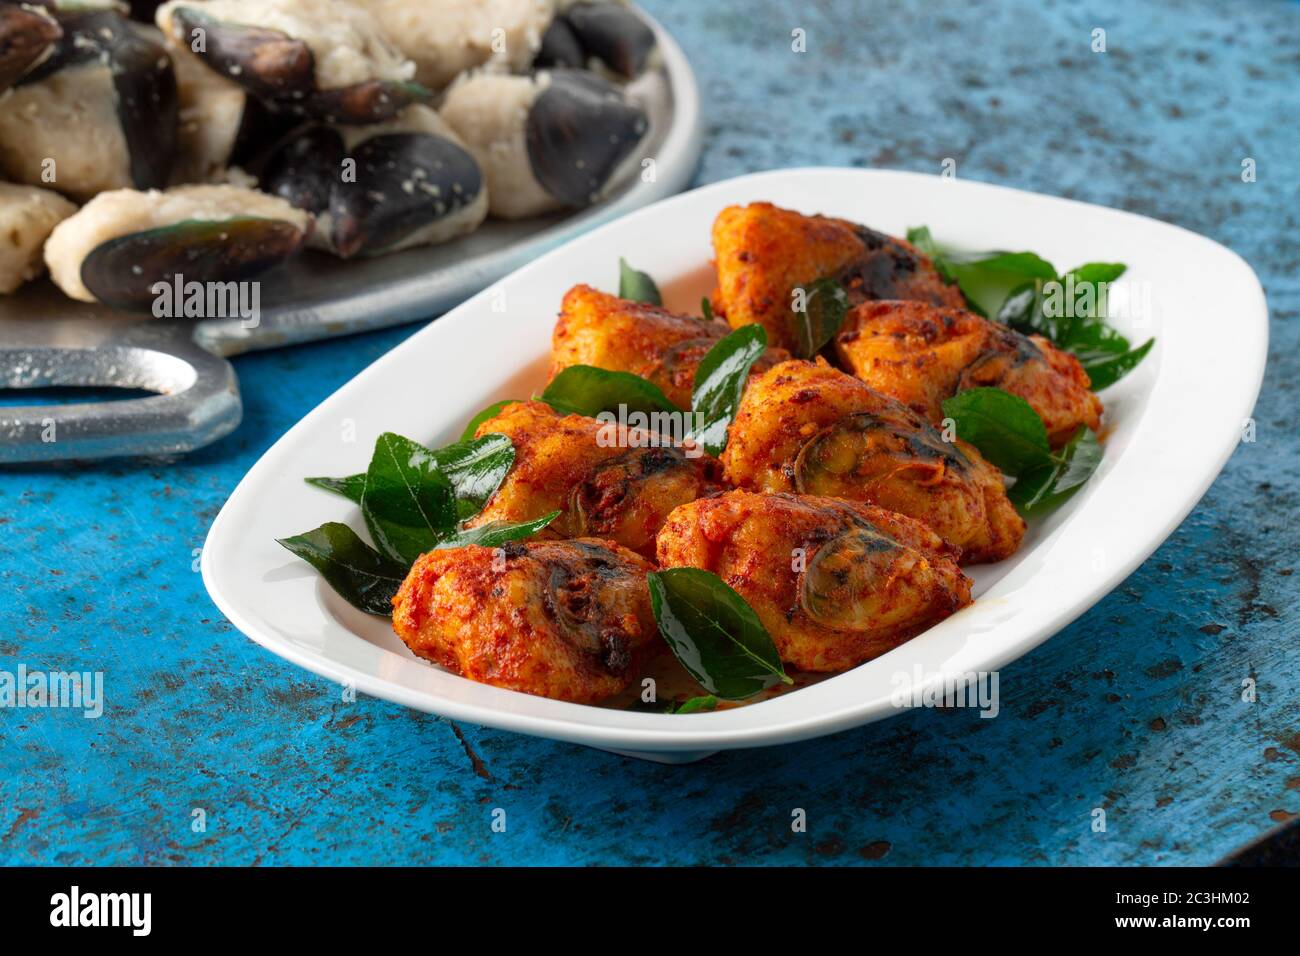 Kerala Stuffed Mussels fry _kerala special snack rice batter stuffed mussels fry,tasty street food with dry ginger coffee with blue background,selecti Stock Photo